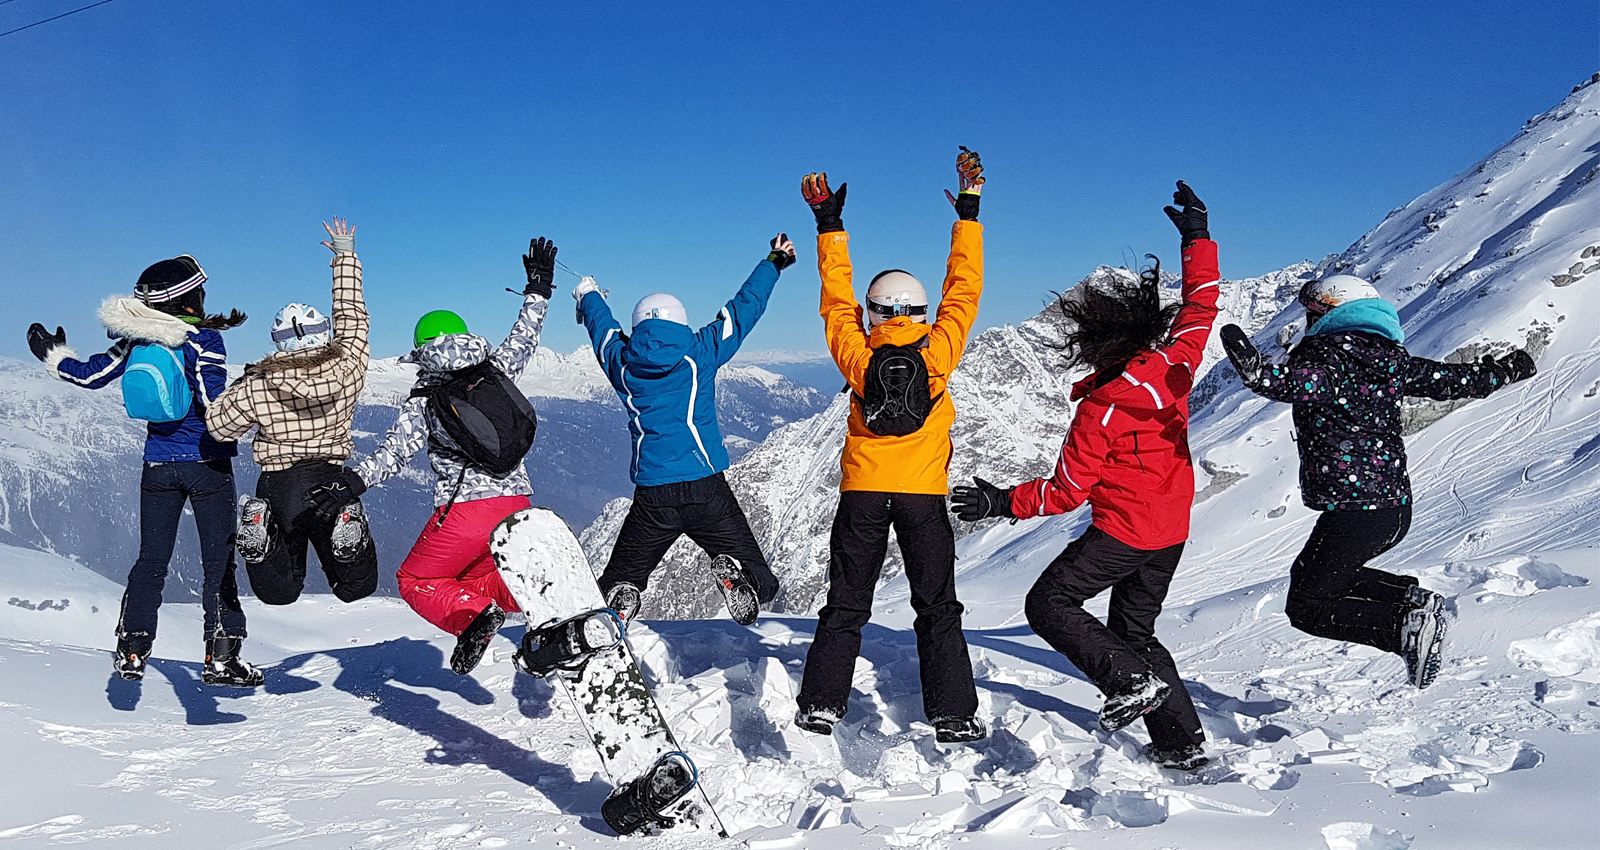 https://www.pgl.co.uk/Files/Files/Schools/Skiing%20and%20Snowboarding/Carousel/SS-M-Ski-Group-Jump-Secondary-Schools.jpg